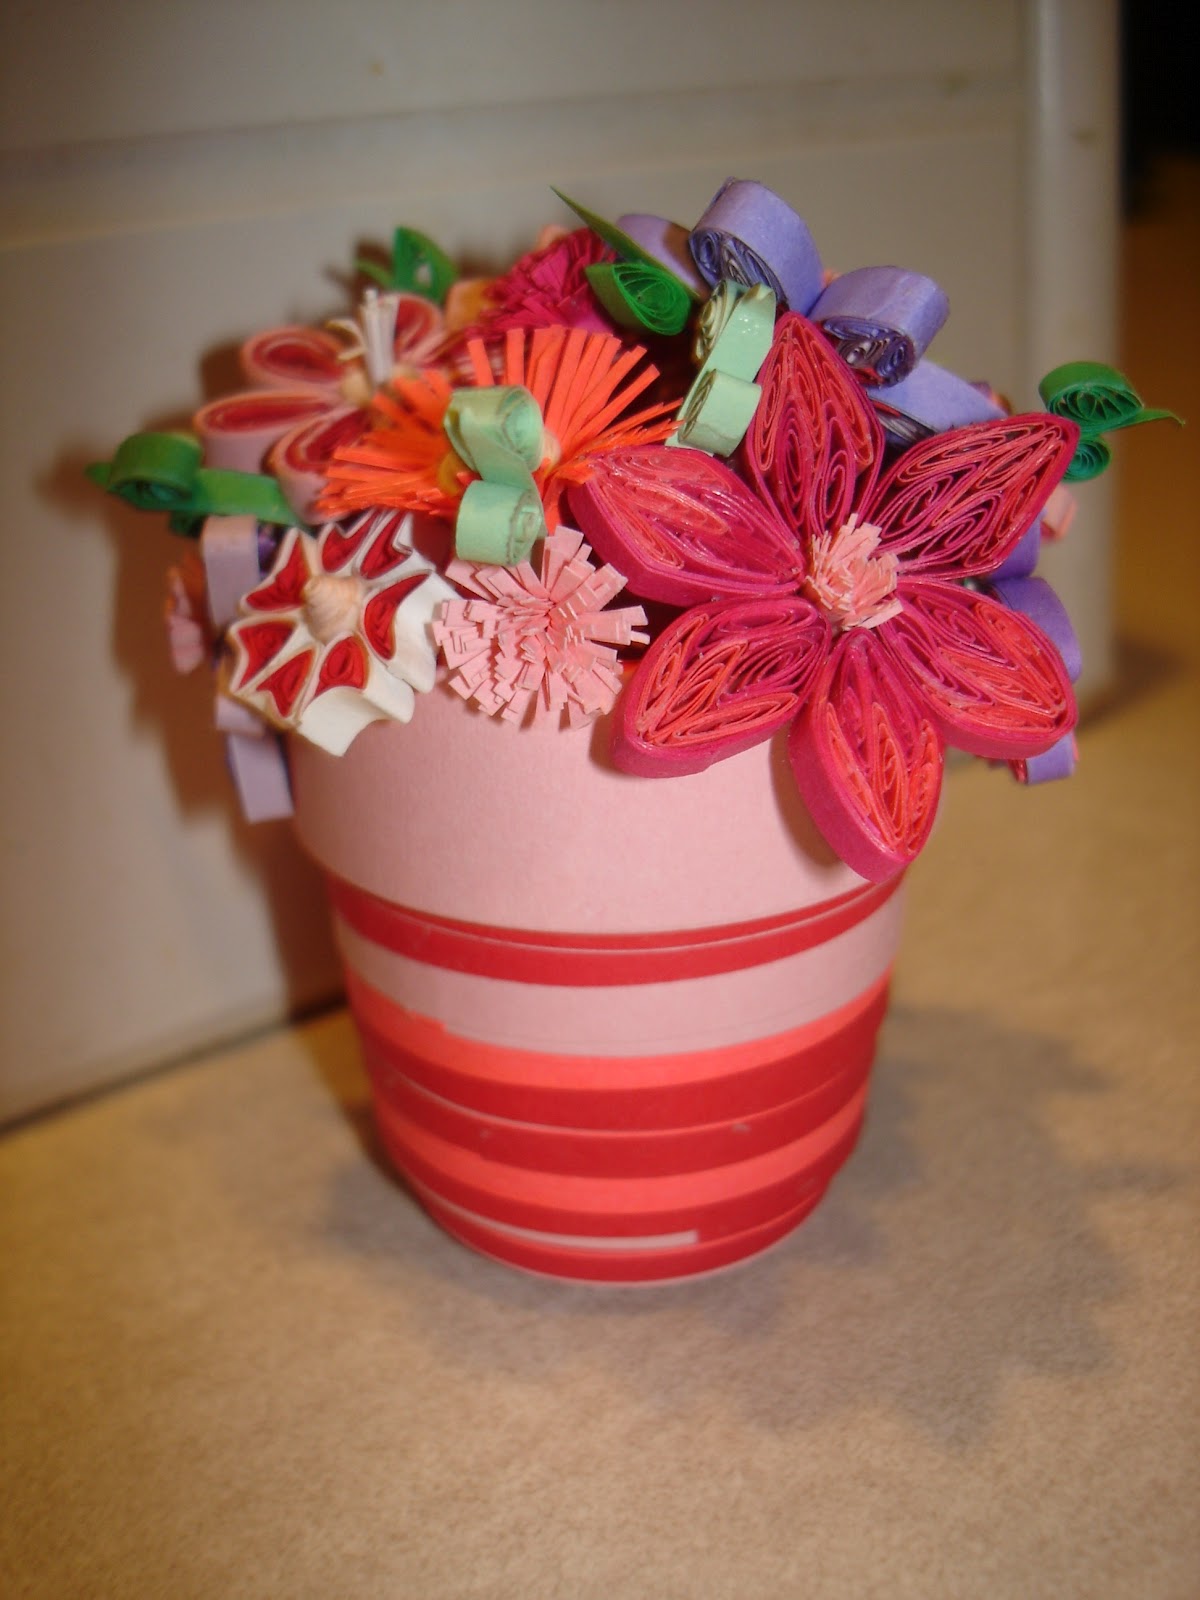 Rachelle's Crafting Zone: Another 3D Quilled Giant Pot